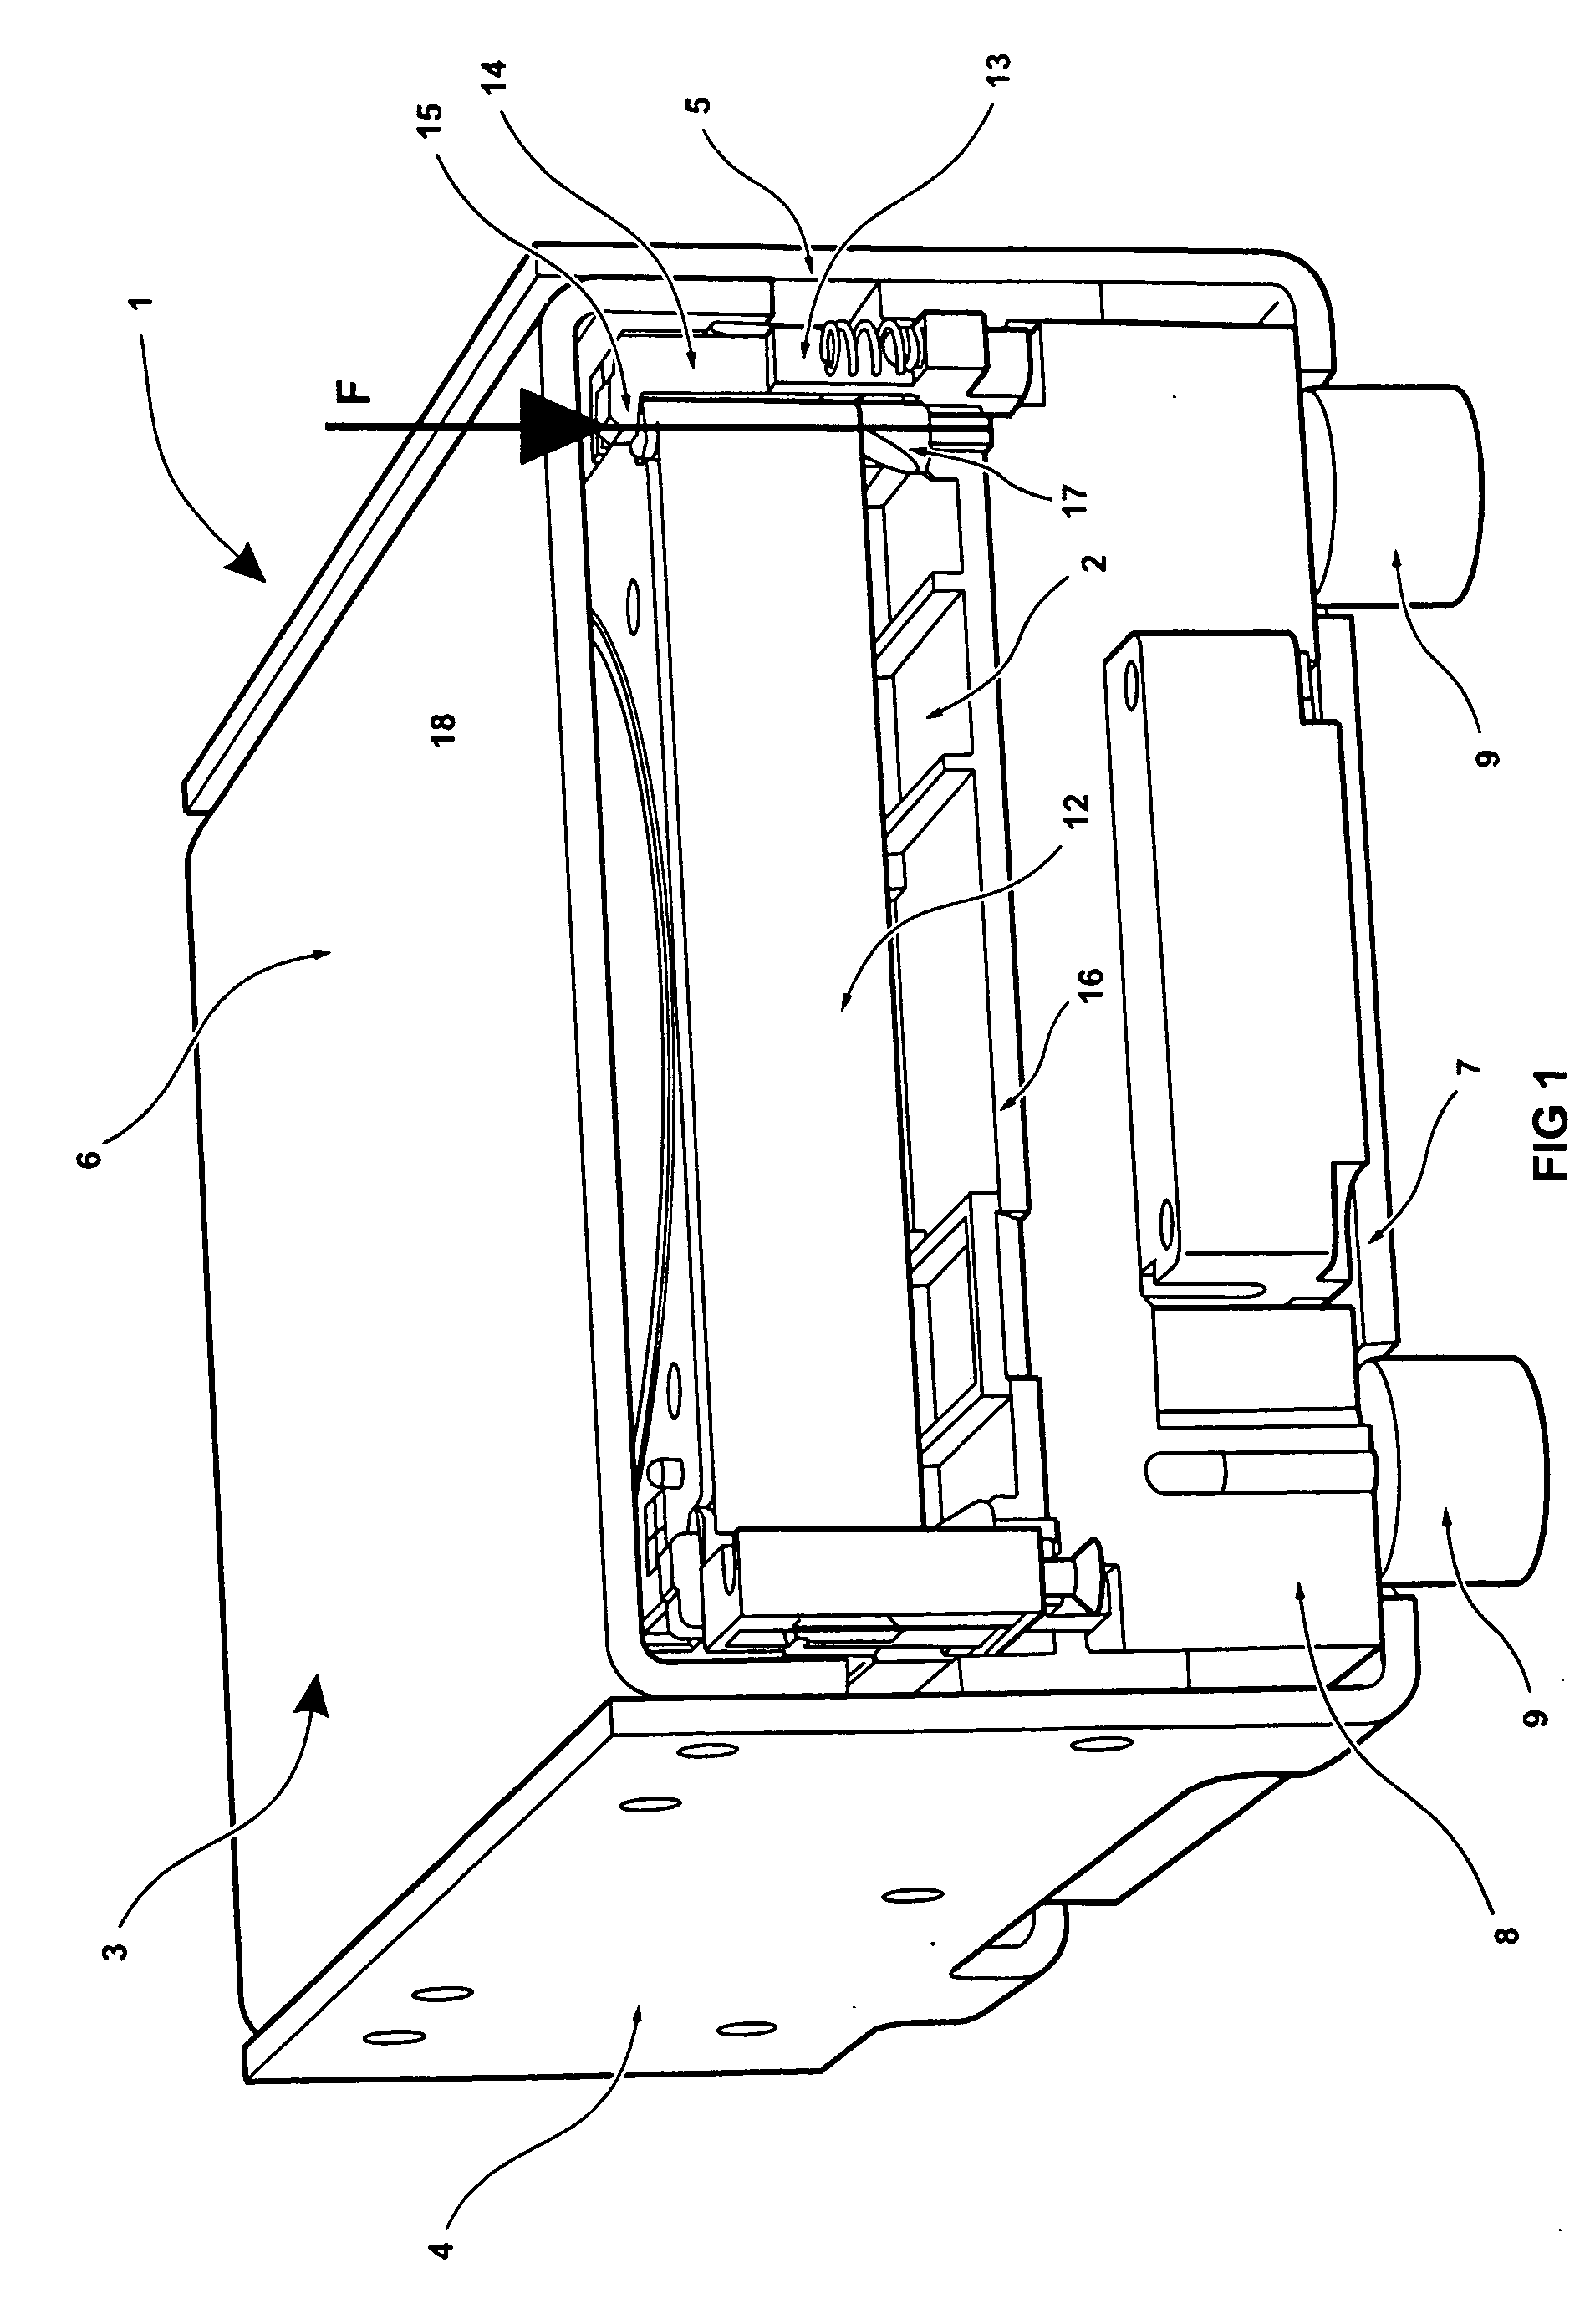 Disk drive support assembly, clamp assembly and disk drive carrier